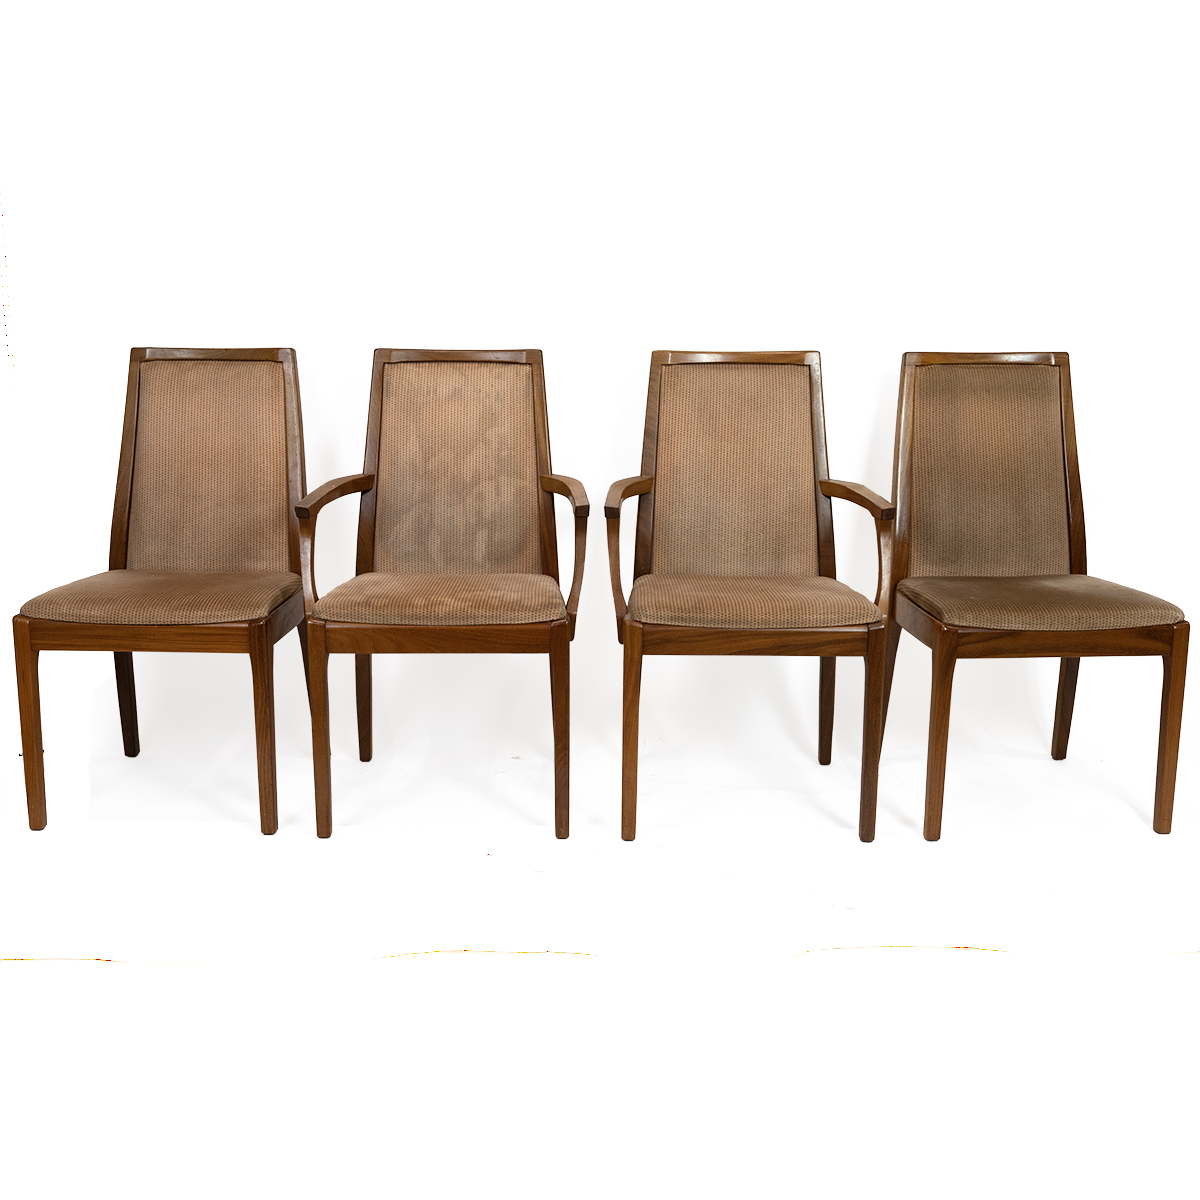 Mid century Nathan beech wood extending dining table and four chairs with three additional chairs... - Image 3 of 6